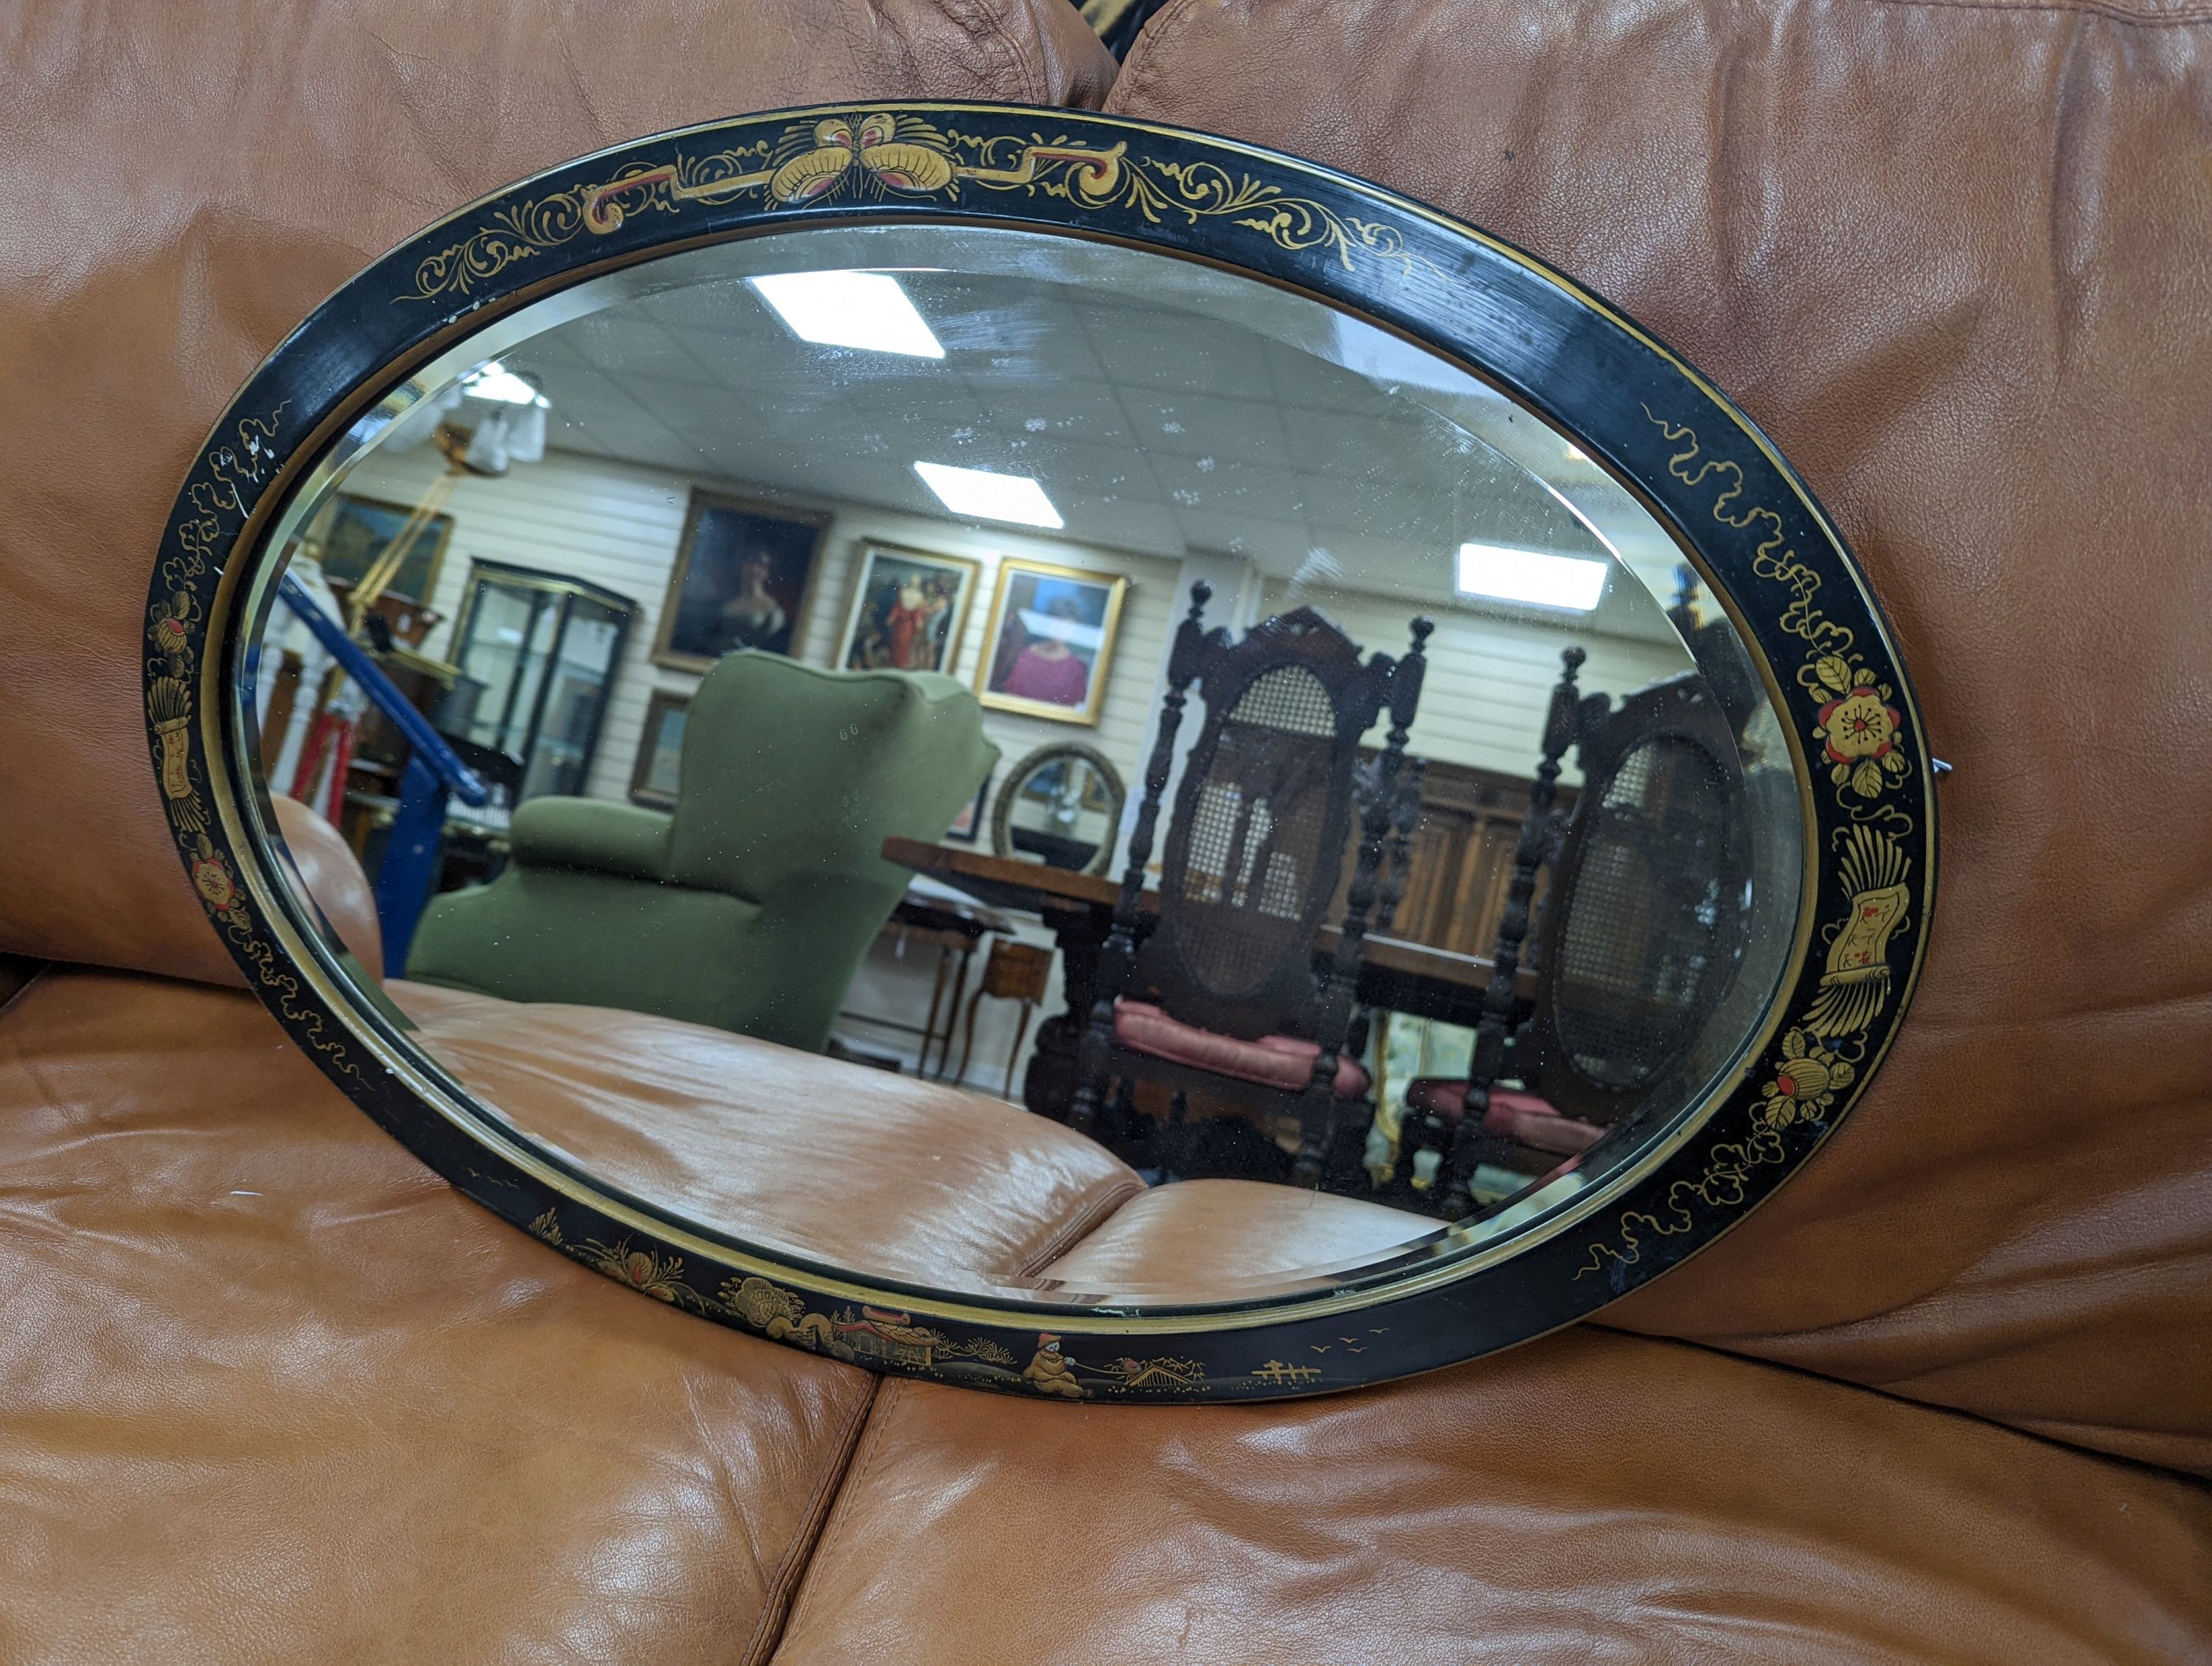 A 1920's oval chinoiserie lacquer wall mirror, width 67cm, height 46cm - To be sold on behalf of The Ukraine Appeal